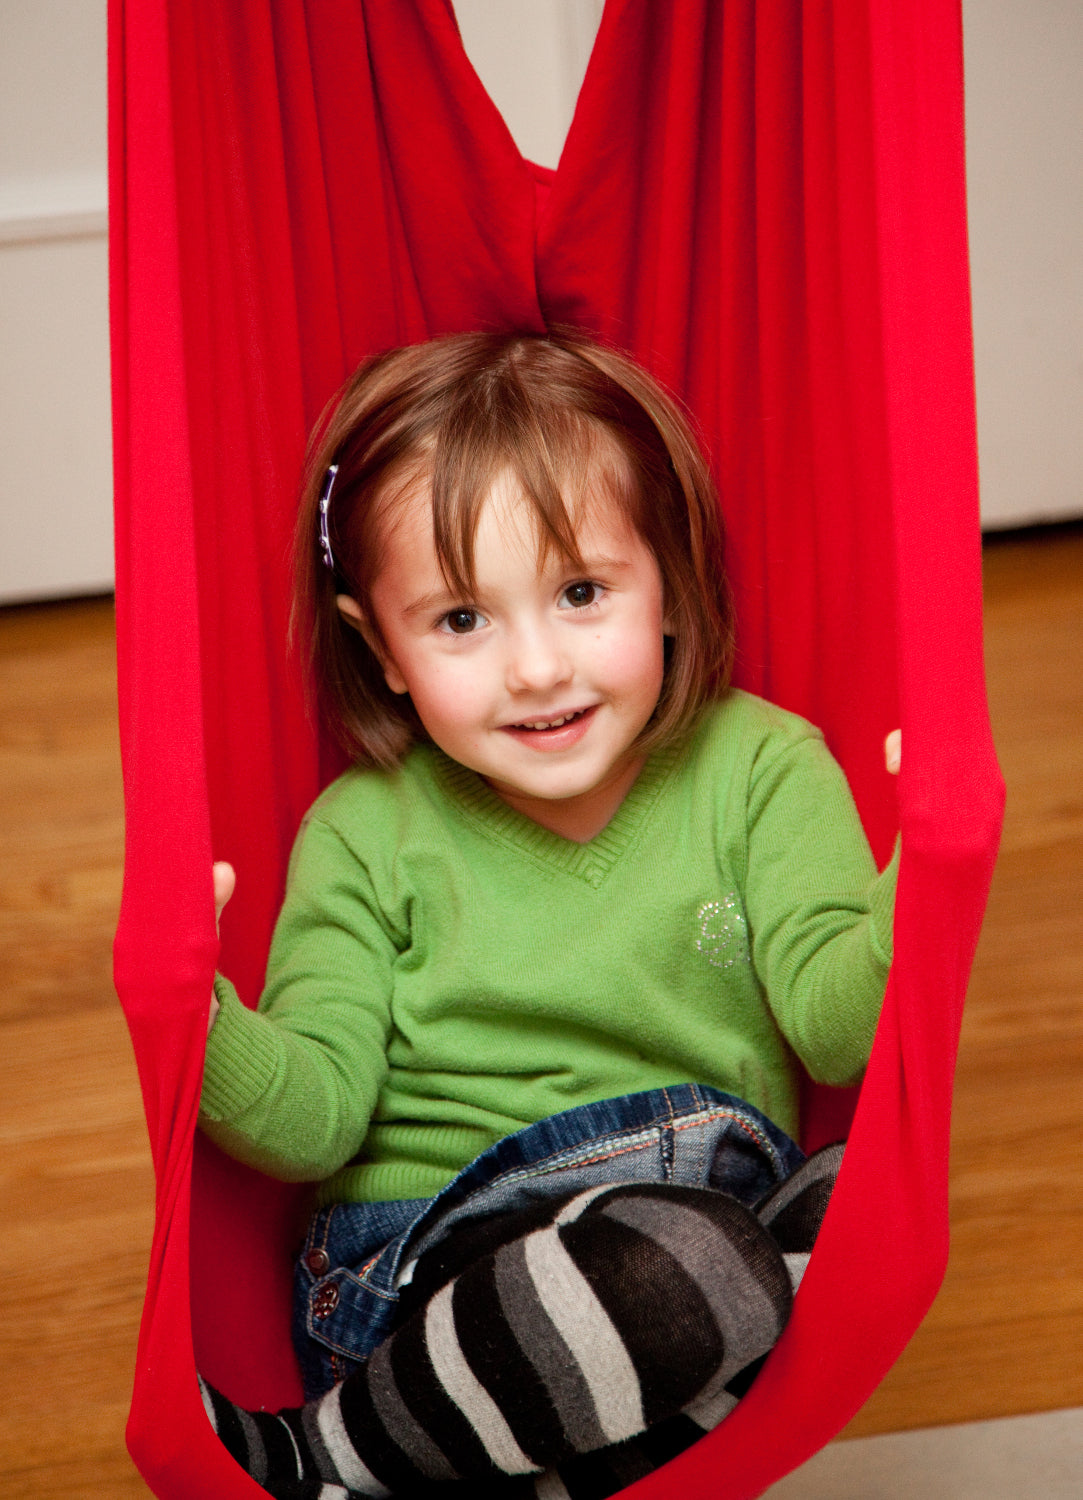 Doorway Therapy Sensory Swing - Red - DreamGYM